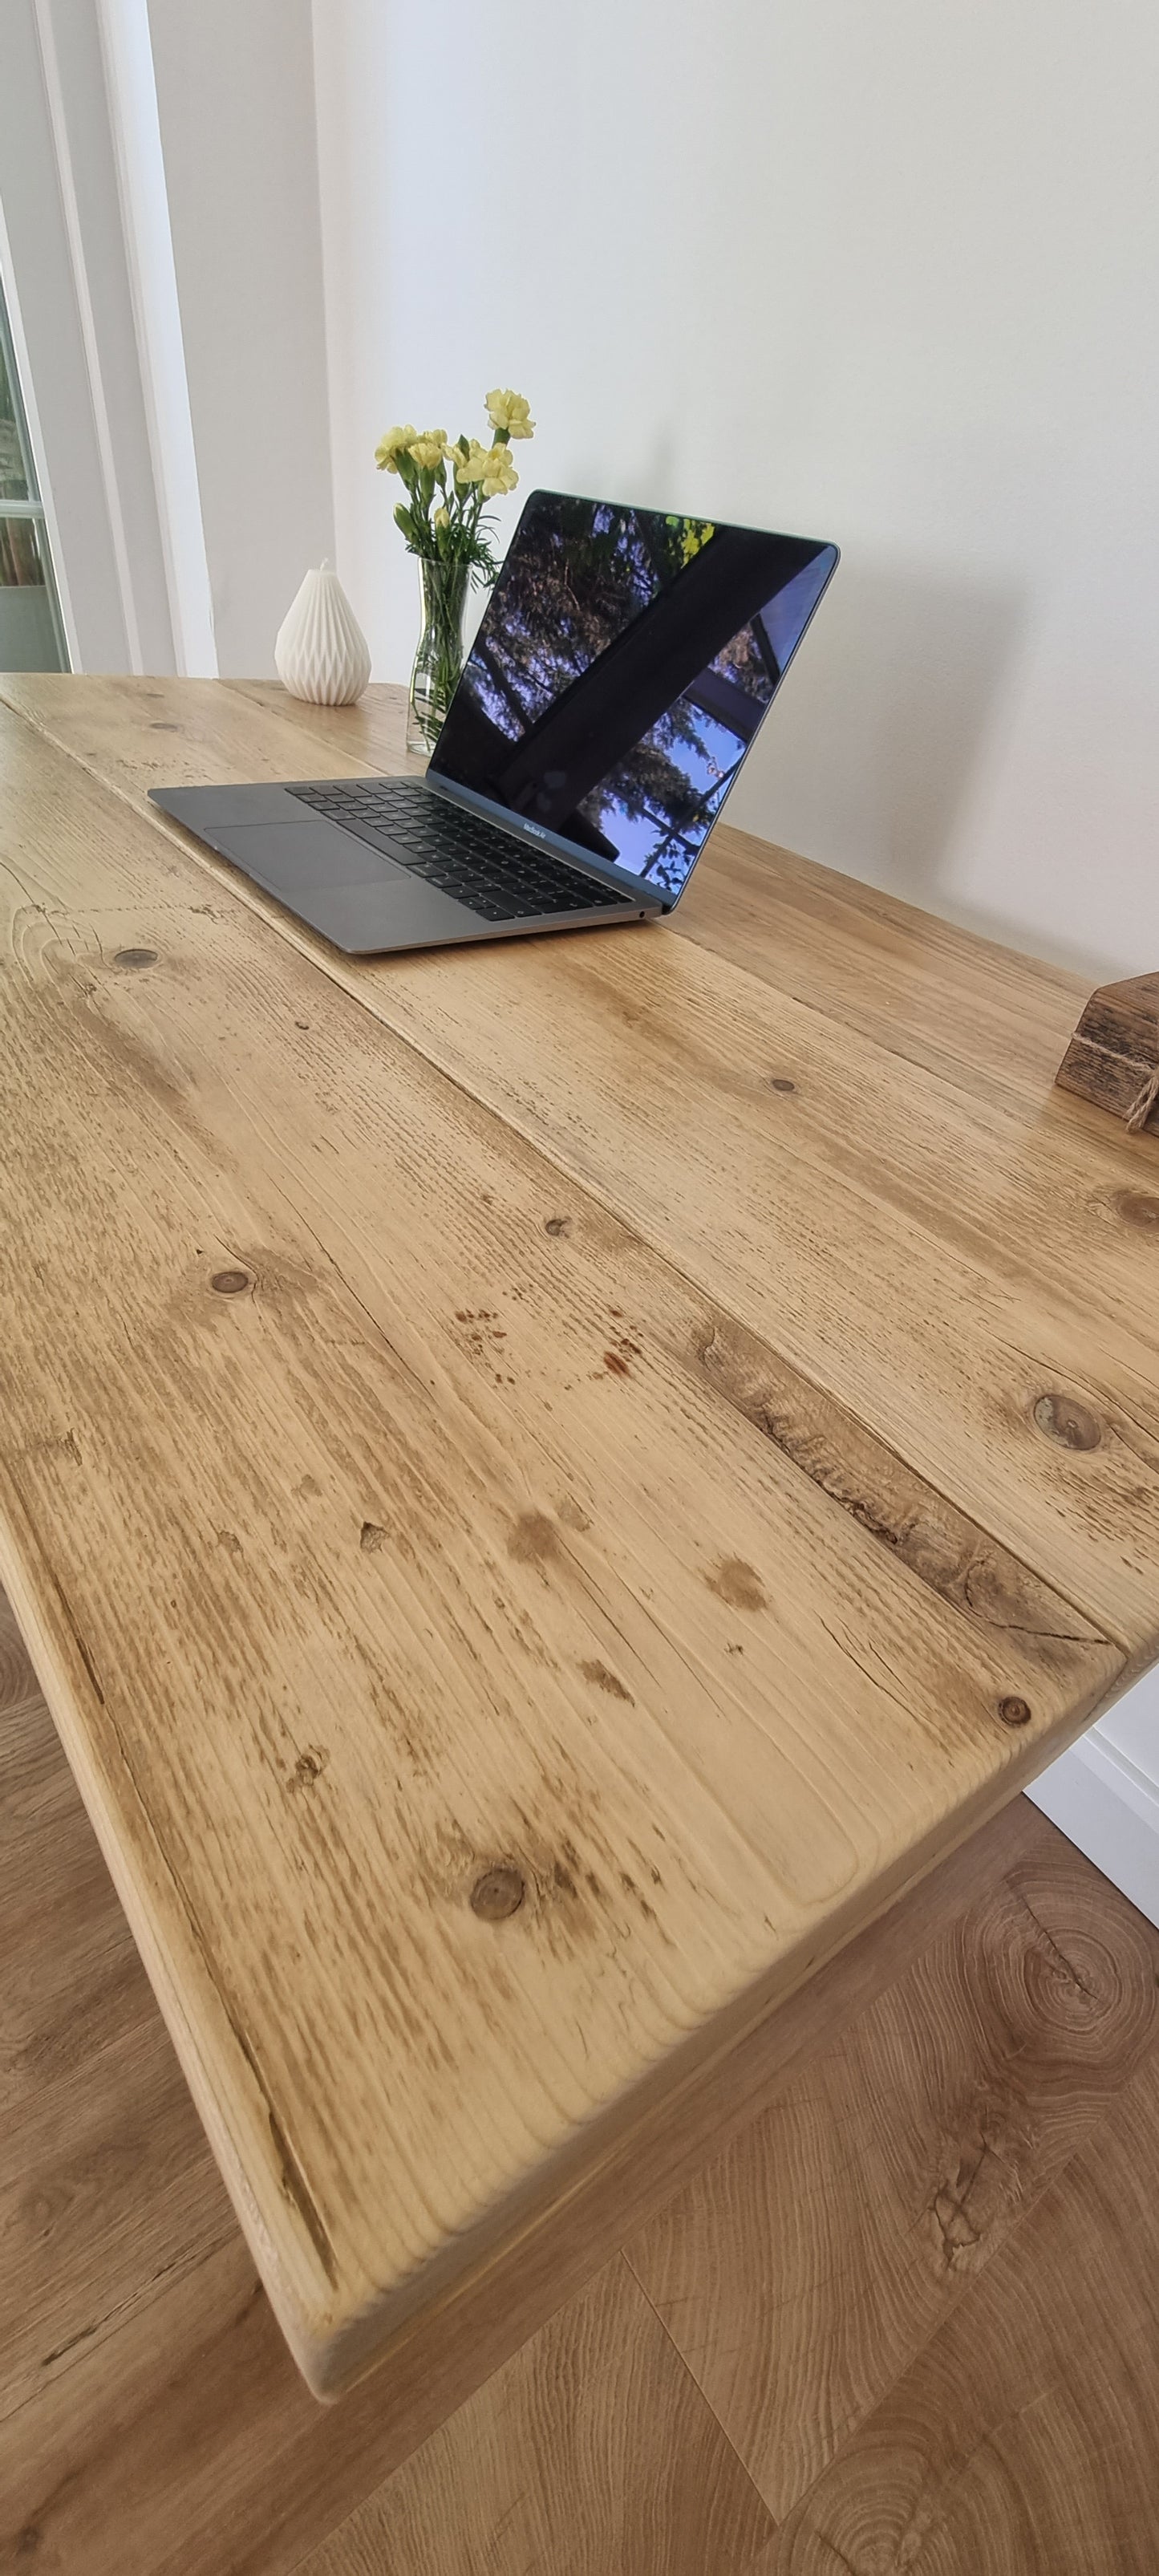 Reclaimed wood sit/stand desk